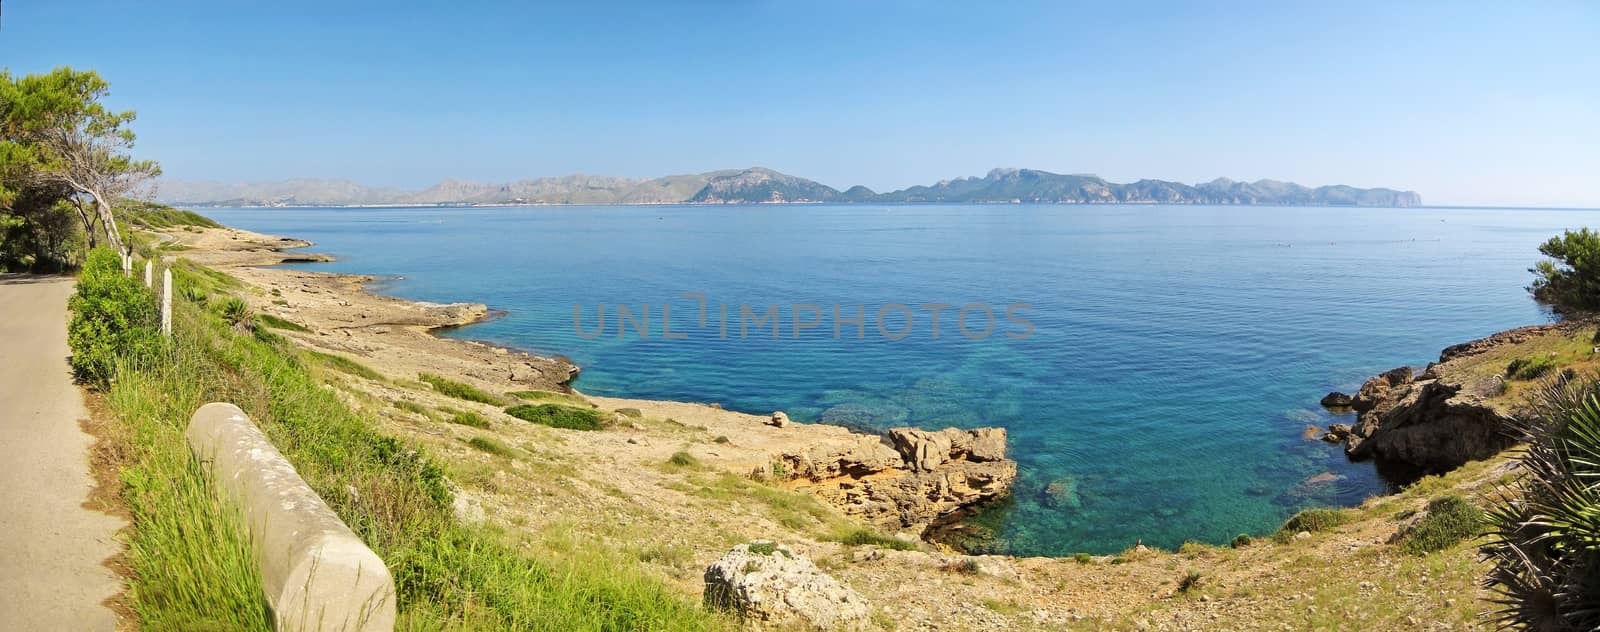 Bay of Pollenca, view from peninsula Victoria towards peninsula Formentor - clear turquoise water of mediterranean sea in front